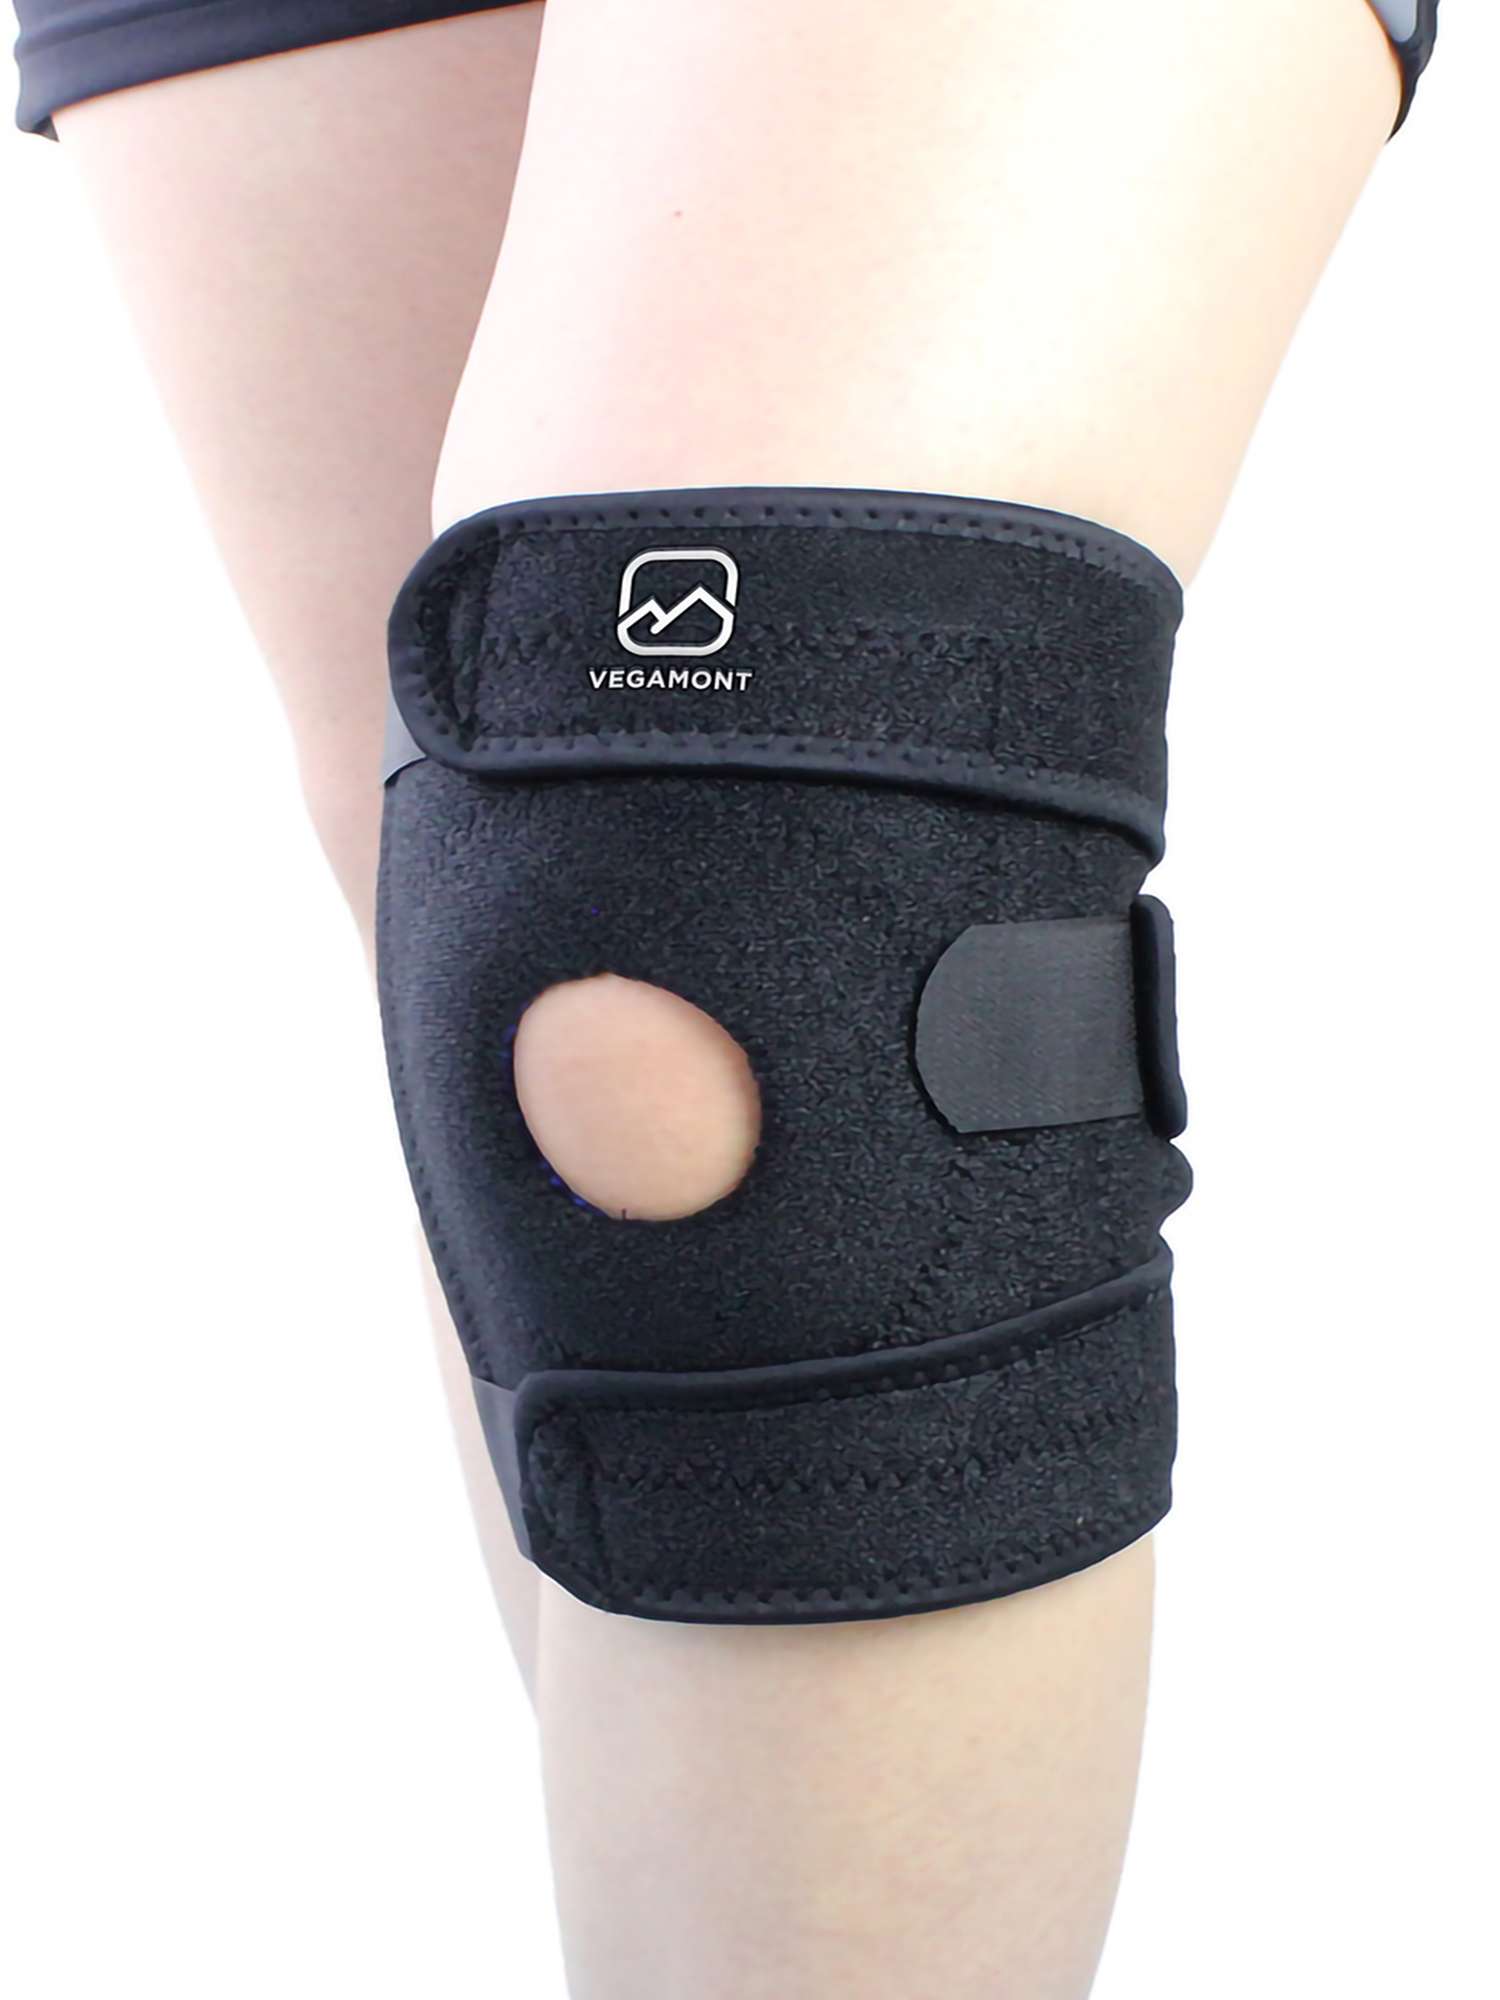 How are knee braces useful for people with arthritis?